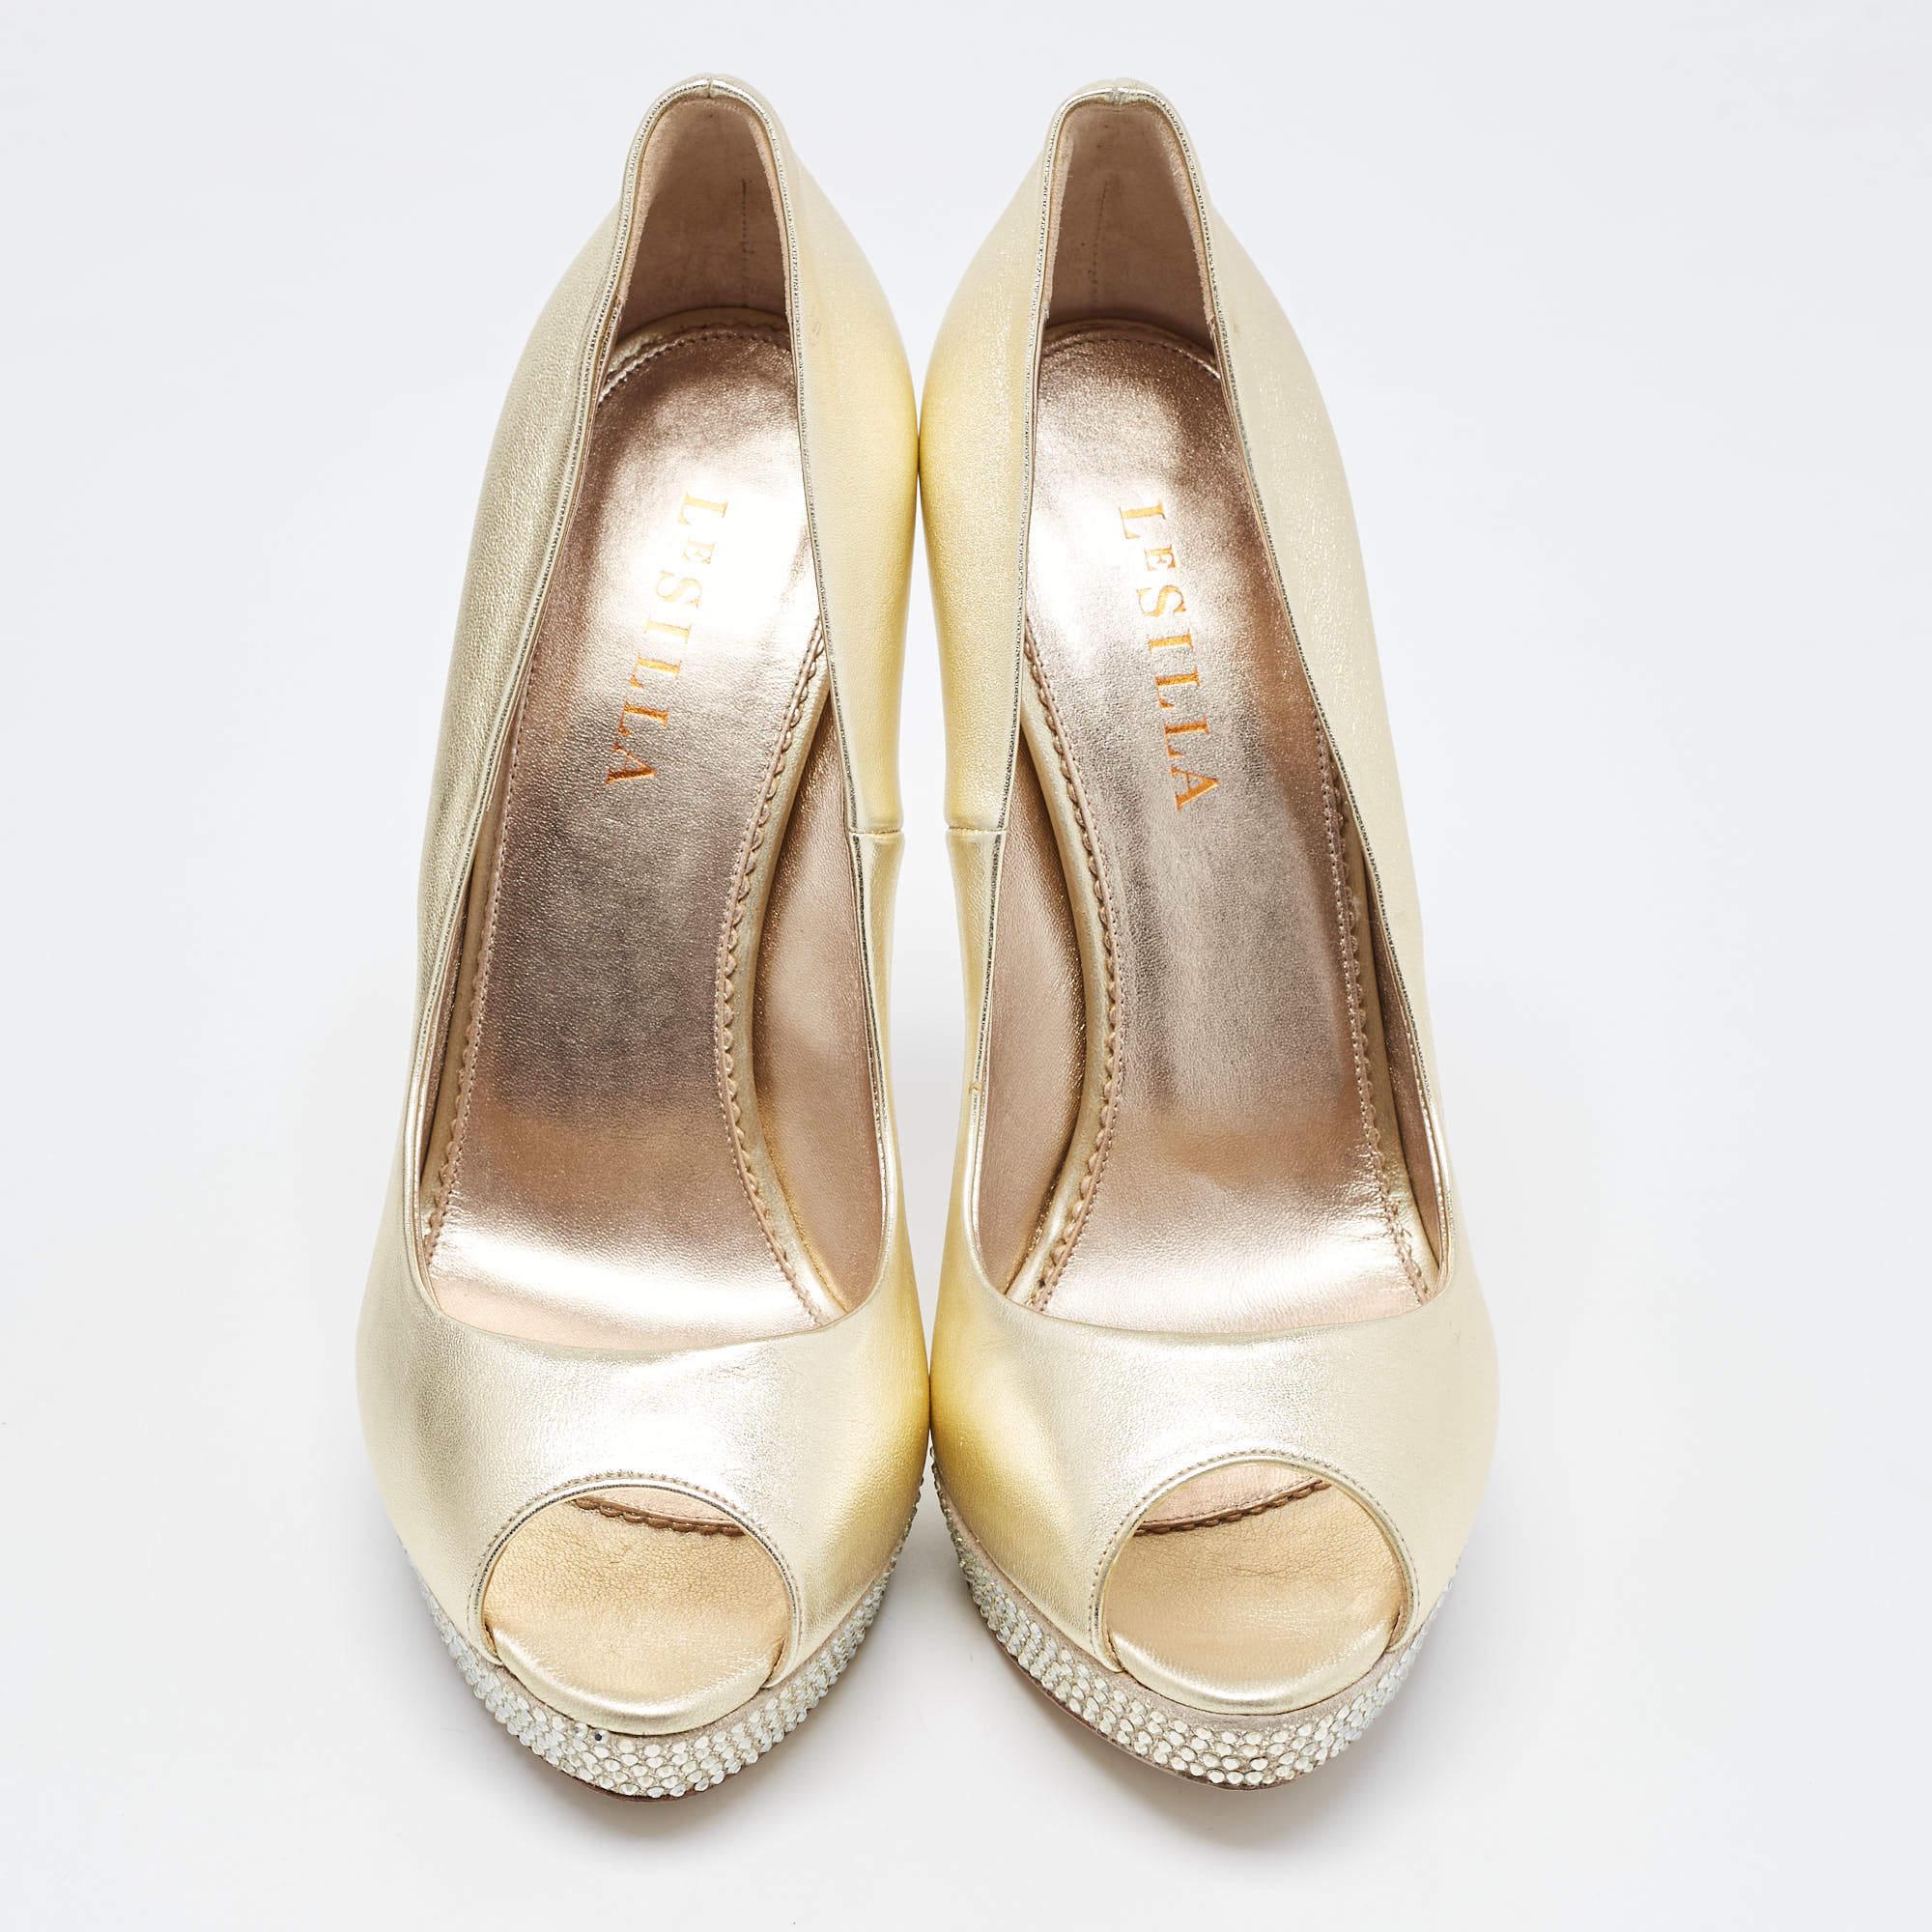 The golden leather exterior makes this pair of Le Silla pumps an ideal party accessory. Designed into a peep-toe silhouette, the creation has been highlighted with embellished heels and platforms and it features a leather sole.

